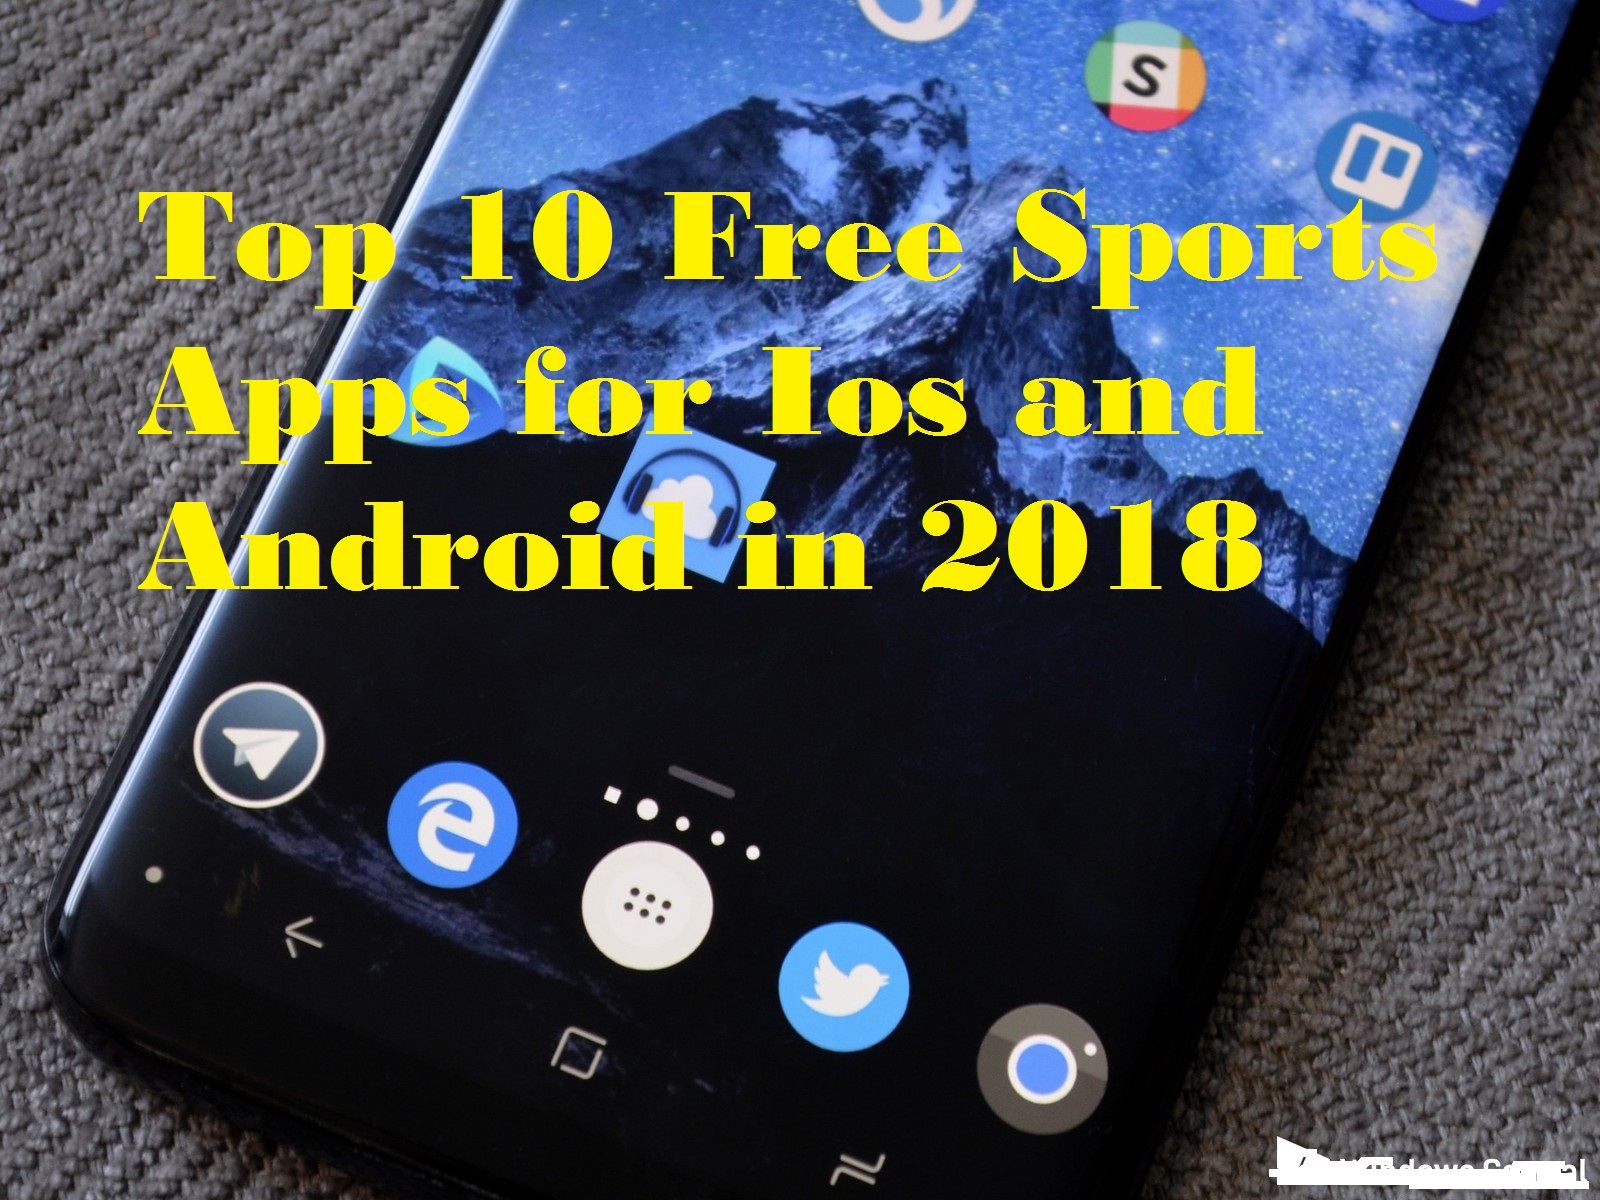 Top 10 Free Sports Apps for Ios and Android in 2018